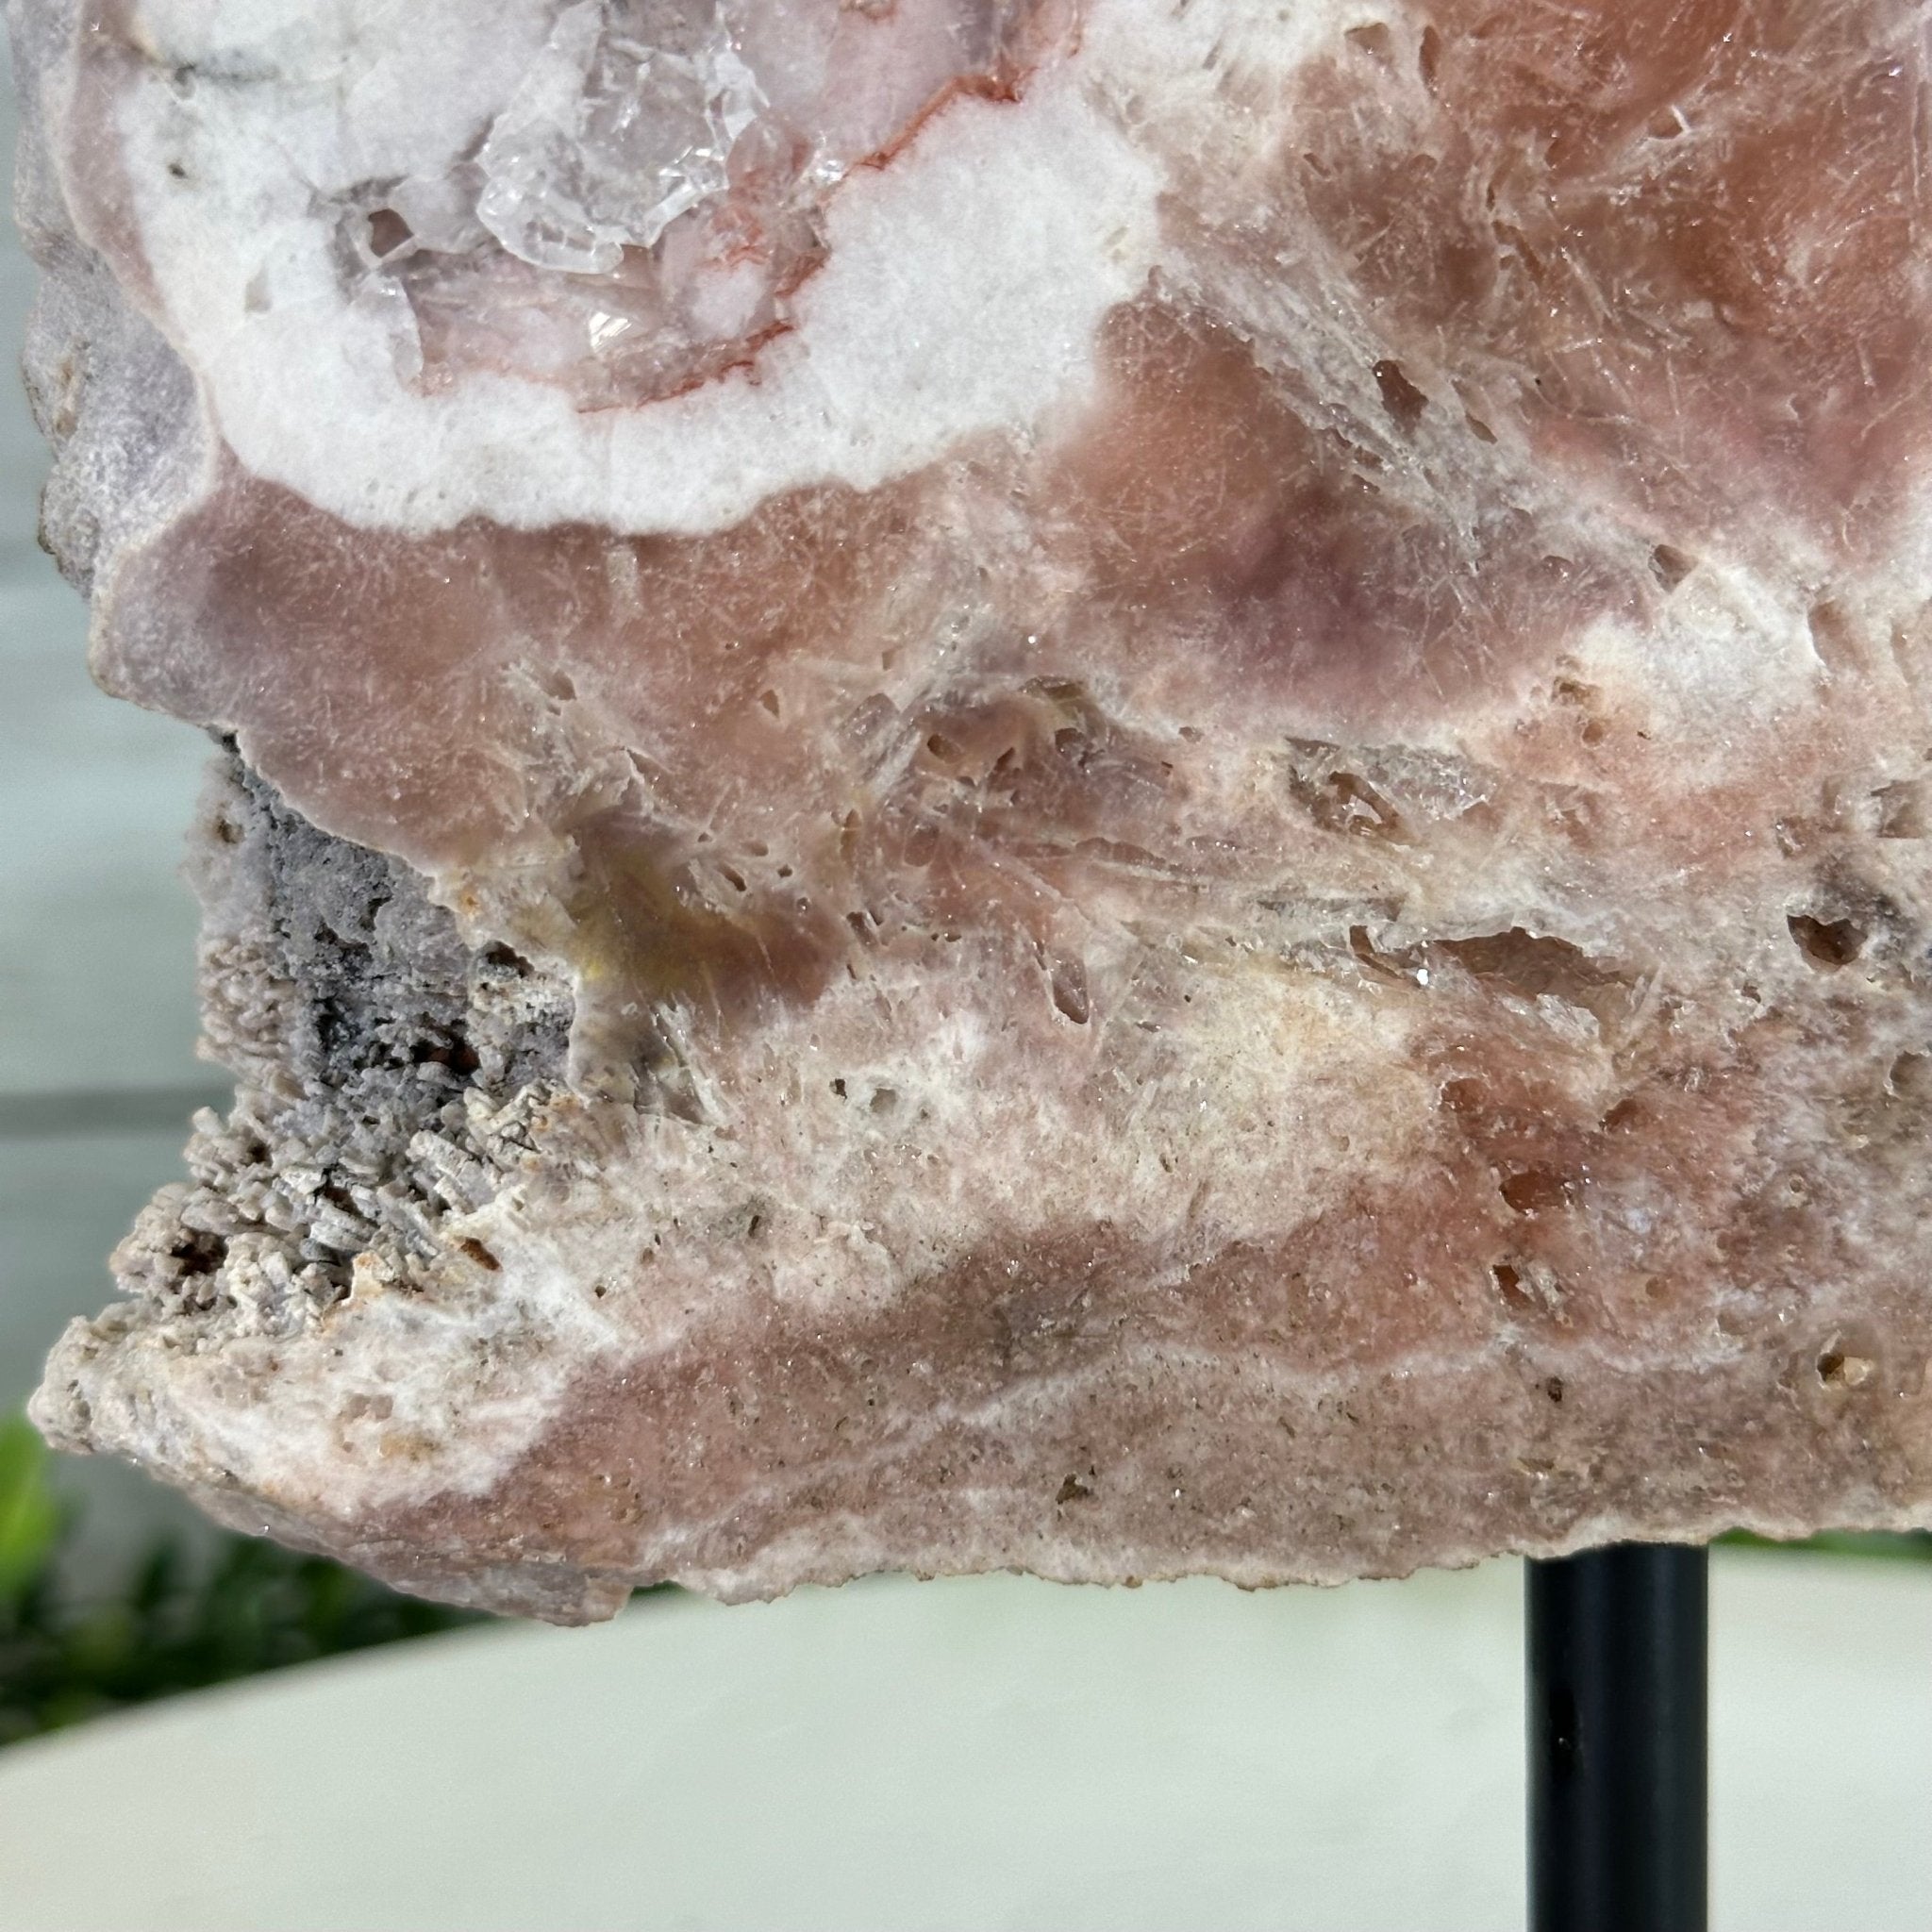 Polished Pink Amethyst Slice on a Stand, 5.3 lbs & 13.4" Tall #5743-0027 - Brazil GemsBrazil GemsPolished Pink Amethyst Slice on a Stand, 5.3 lbs & 13.4" Tall #5743-0027Slices on Fixed Bases5743-0027